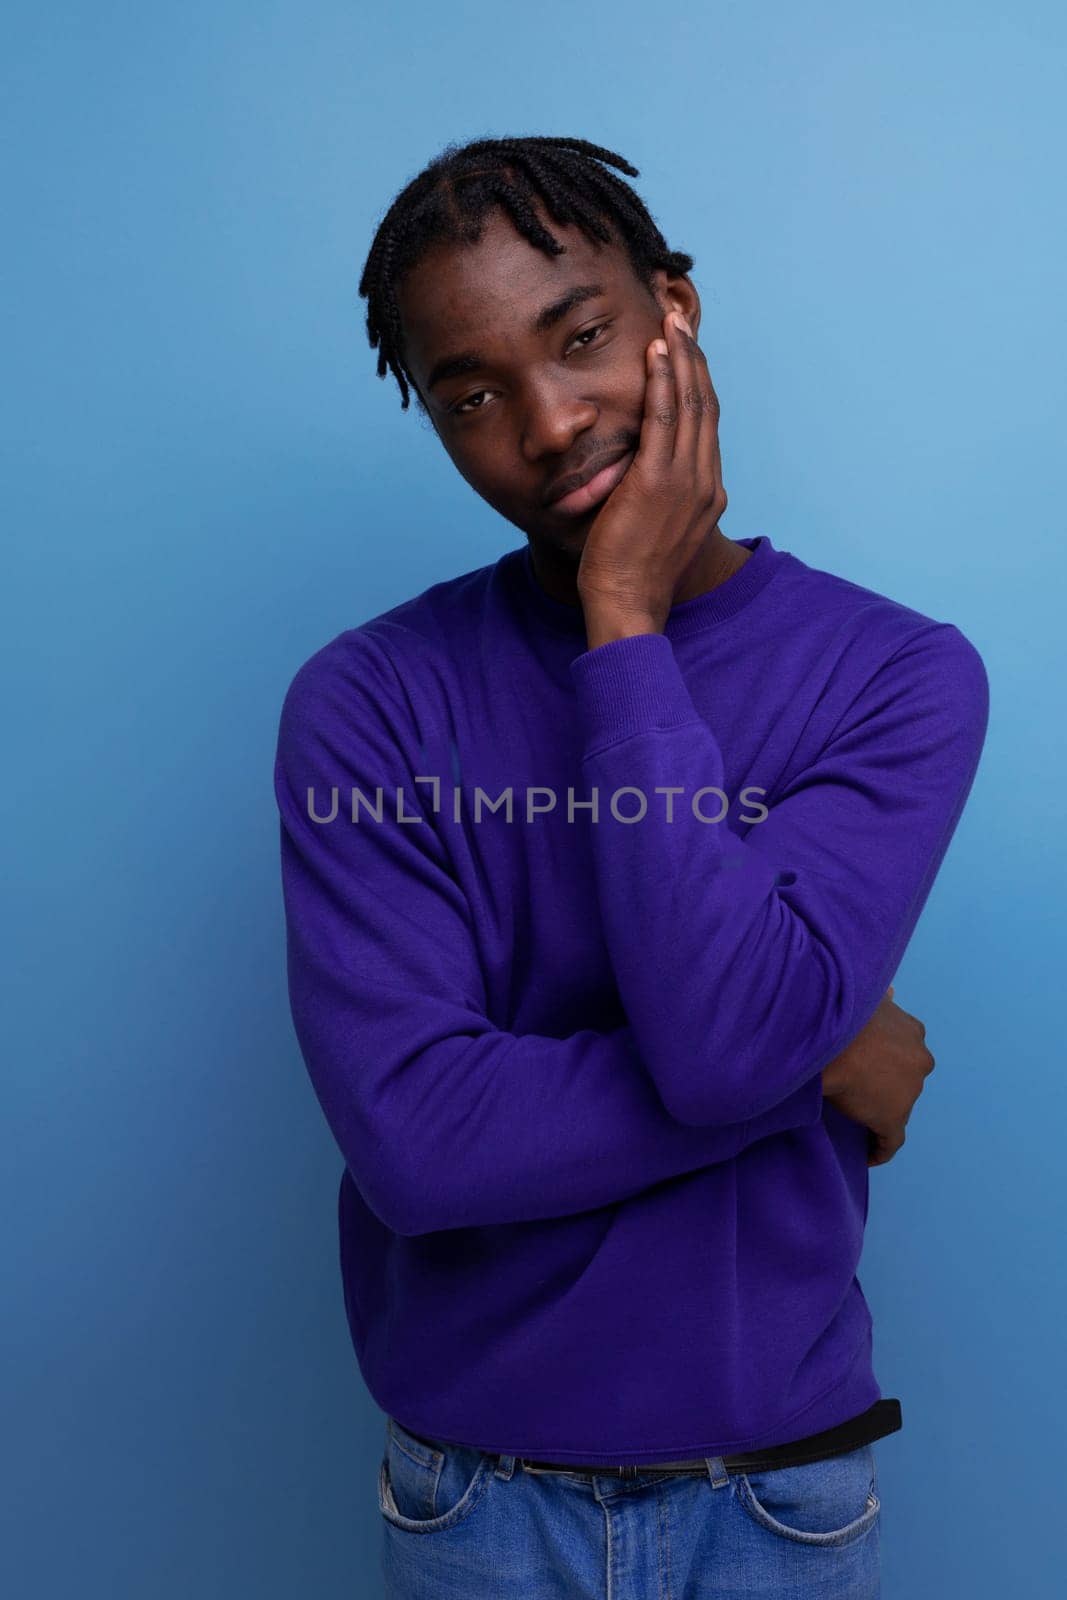 funny american young man with dreadlocks in a blue sweatshirt.